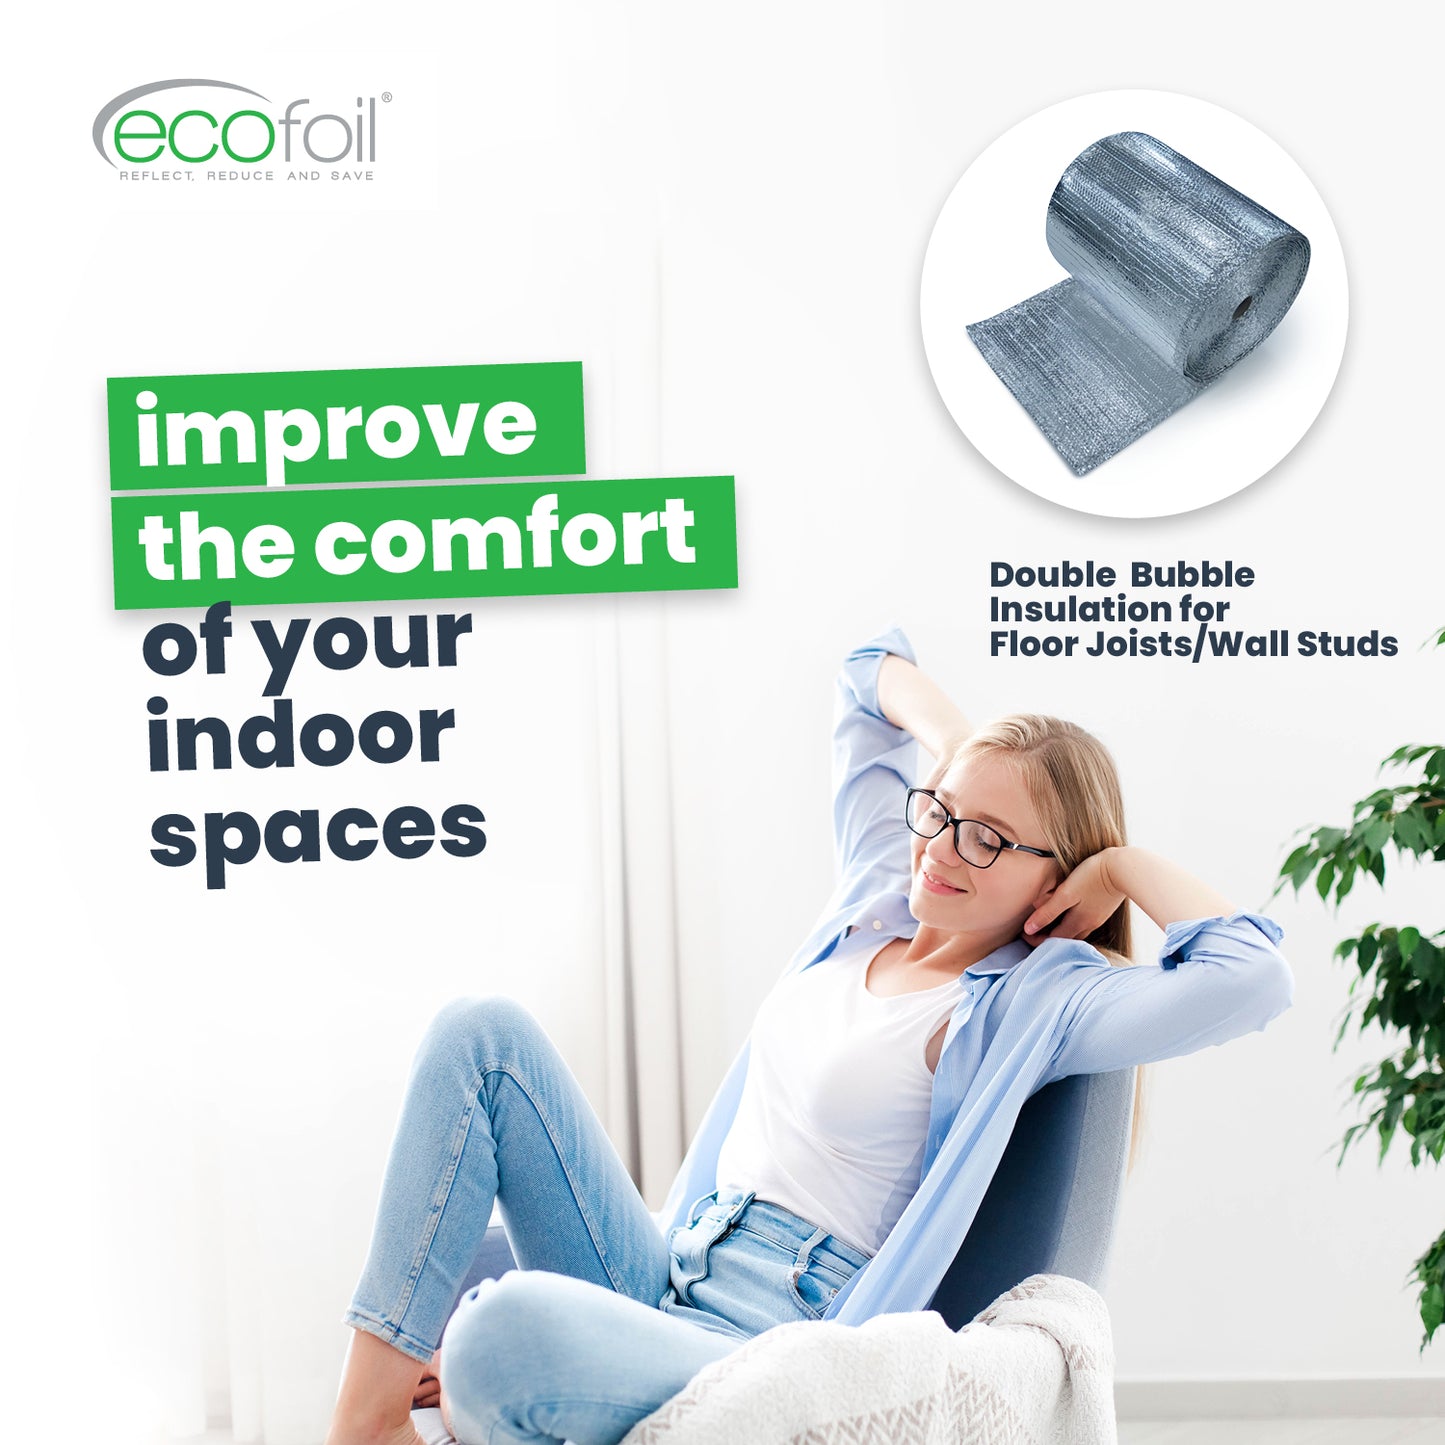 improve the comfort of indoor spaces with double bubble insulation